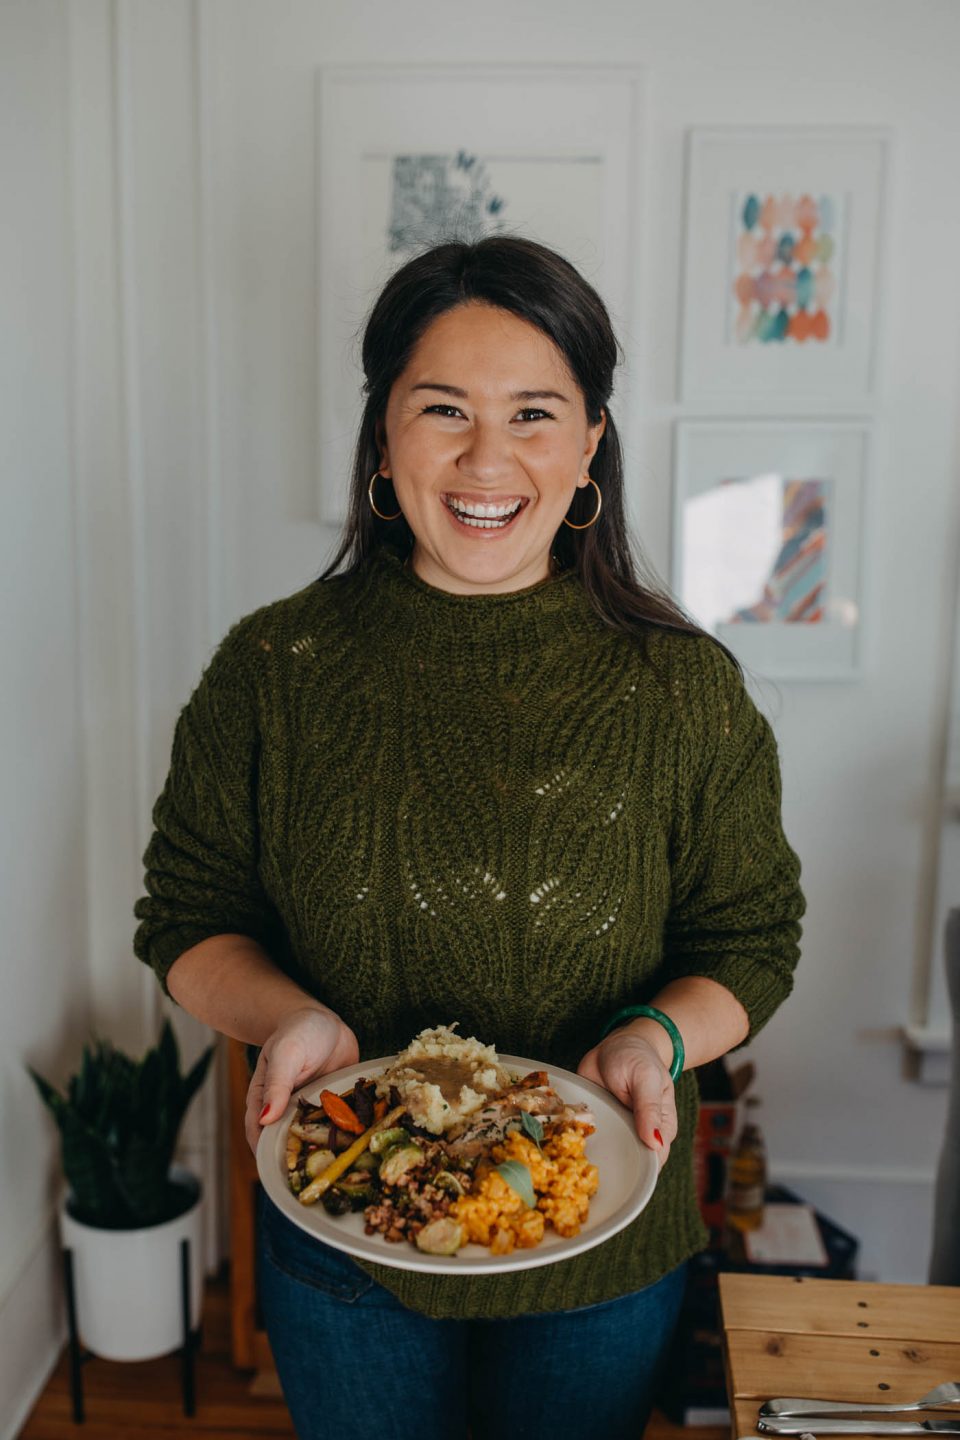 Dark-haired woman in a green sweater holds a plate of her Thanksgiving Dinner, in front of a festive tablescape & a full Thanksgiving dinner spread.